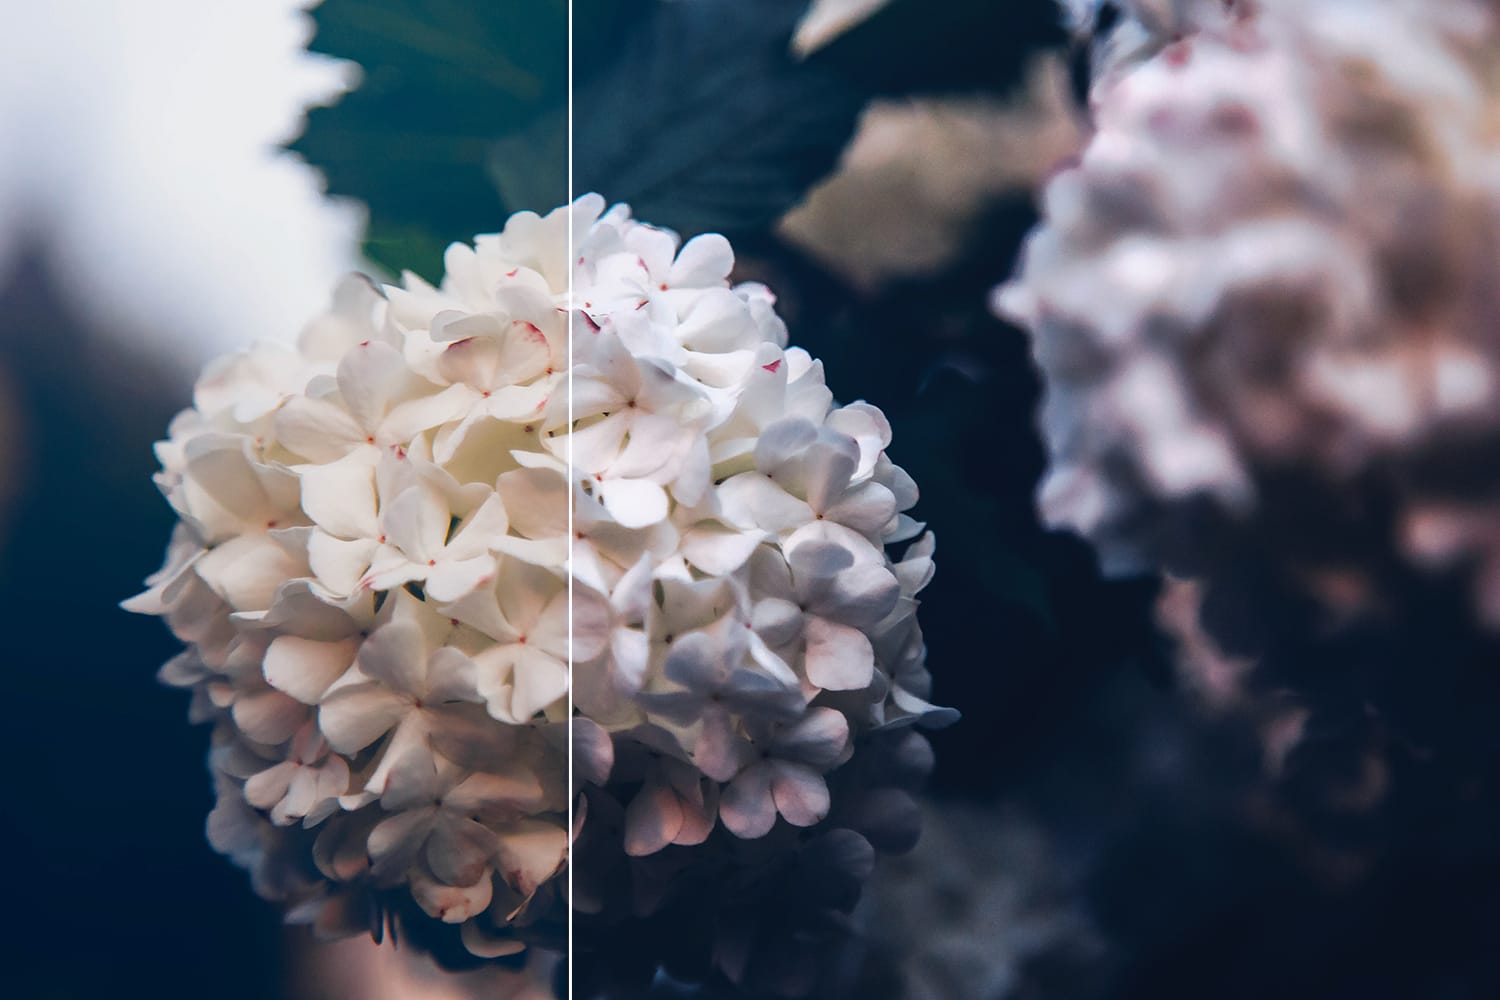 What Are LUTs and How Do You Use Them in Photography?